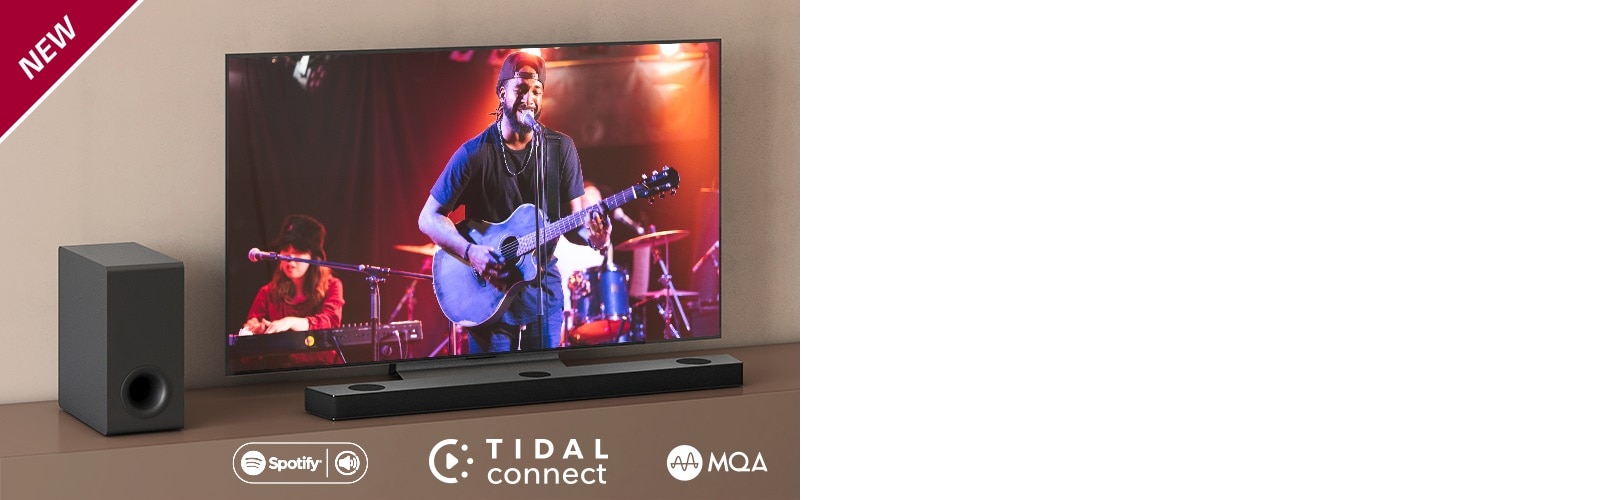 LG TV is placed on the brown shelf, LG Sound Bar S95QR is placed in front of the TV. Subwoofer is placed left side of the TV. TV shows a concerts scene. NEW mark is shown in the top left corner.